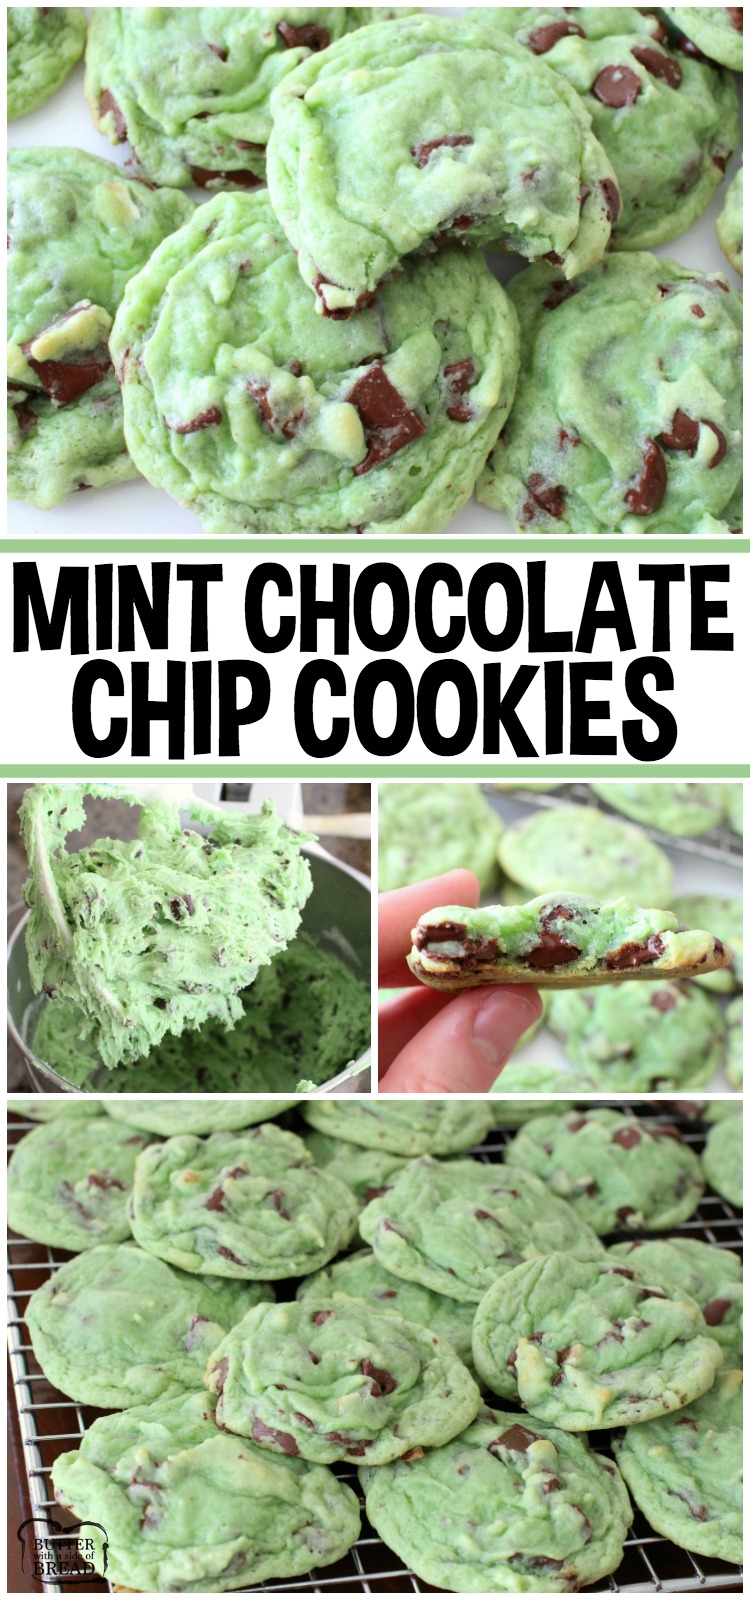 Mint Chocolate Chip Cookies made with pudding mix, mint extract & chocolate chips. Lovely cookie recipe perfect for those who love mint chip ice cream! #cookies #mint #chocolate #baking #dessert #Christmas #StPatricksDay #recipe from BUTTER WITH A SIDE OF BREAD